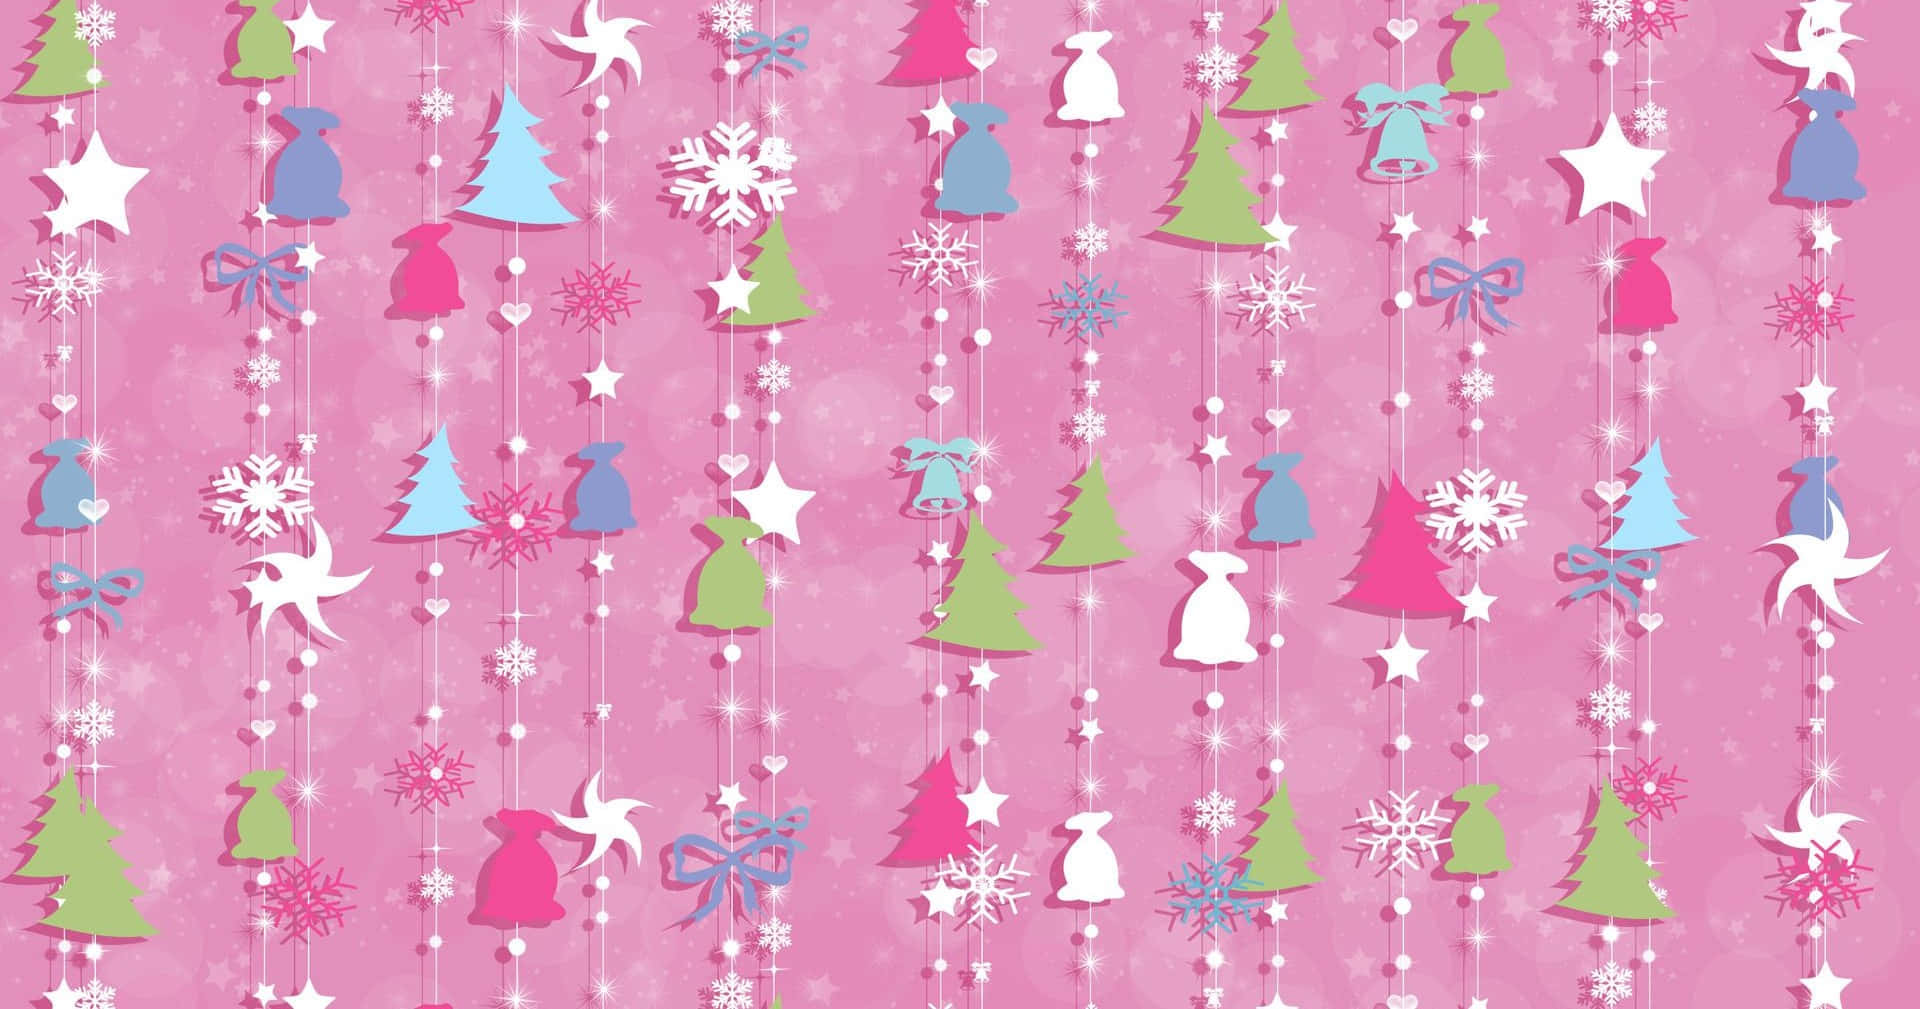 Download Festive Christmas Pattern Background | Wallpapers.com